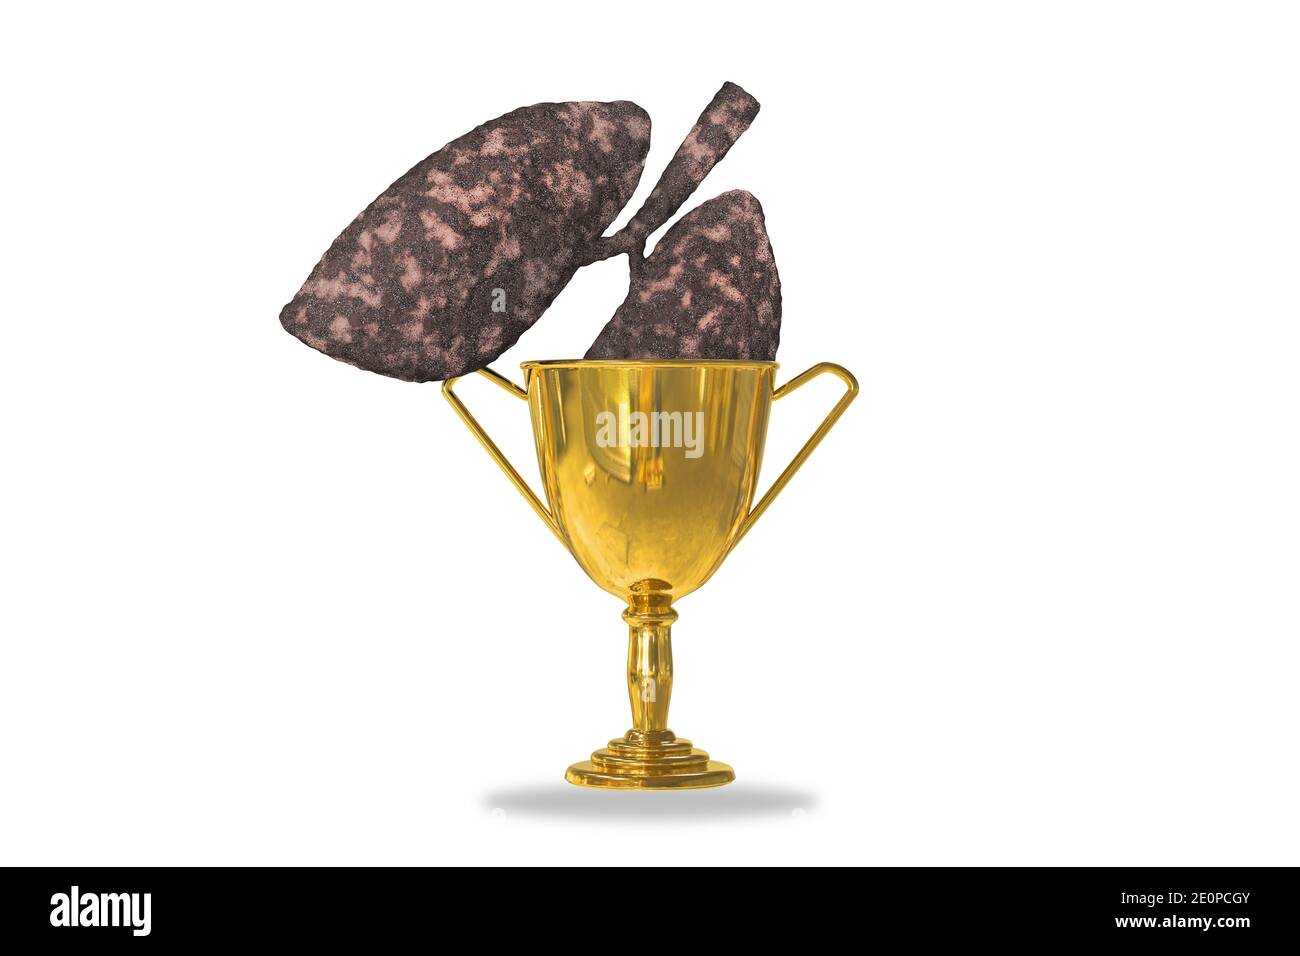 Golden trophy cup isolated on white background with disease lung inside. No smoking day world,31 May or quitting smoking. 3d illustration Stock Photo